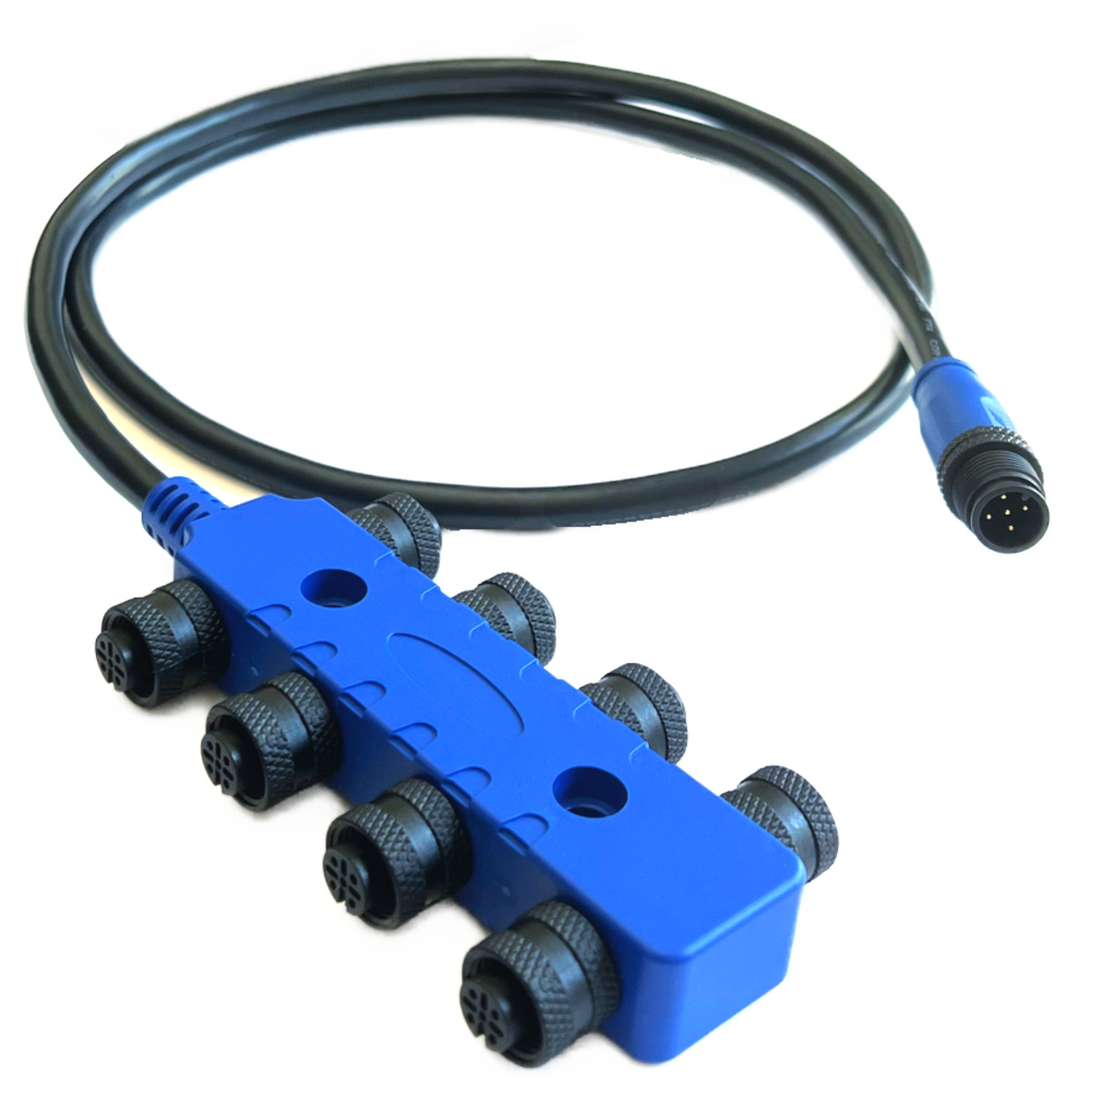 NMEA 2000 8-Way Splitter Cable (1.0 M / 3.28 ft) 8 Female to 1 Male